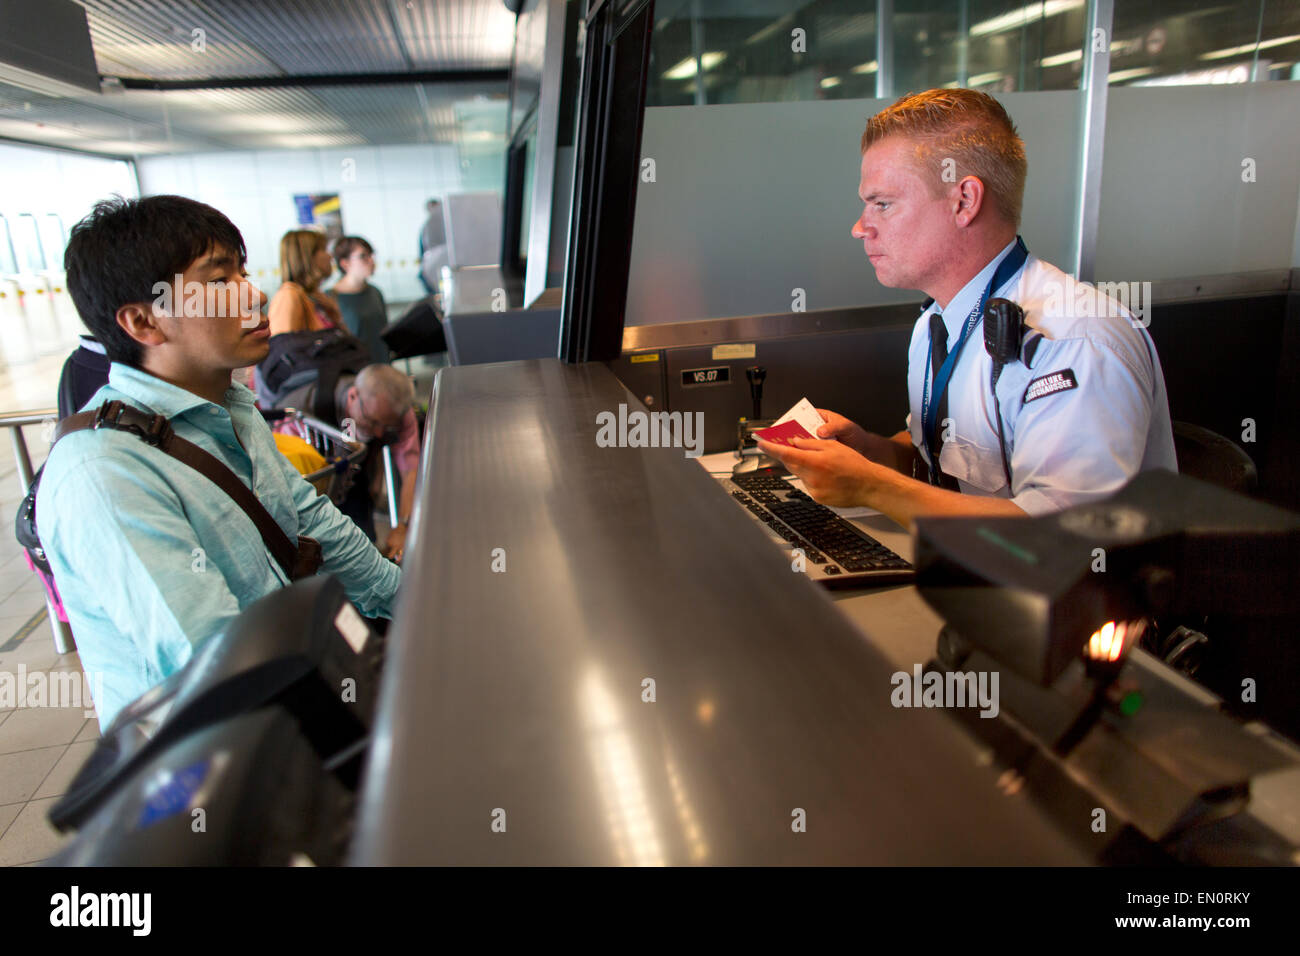 airport customs officer